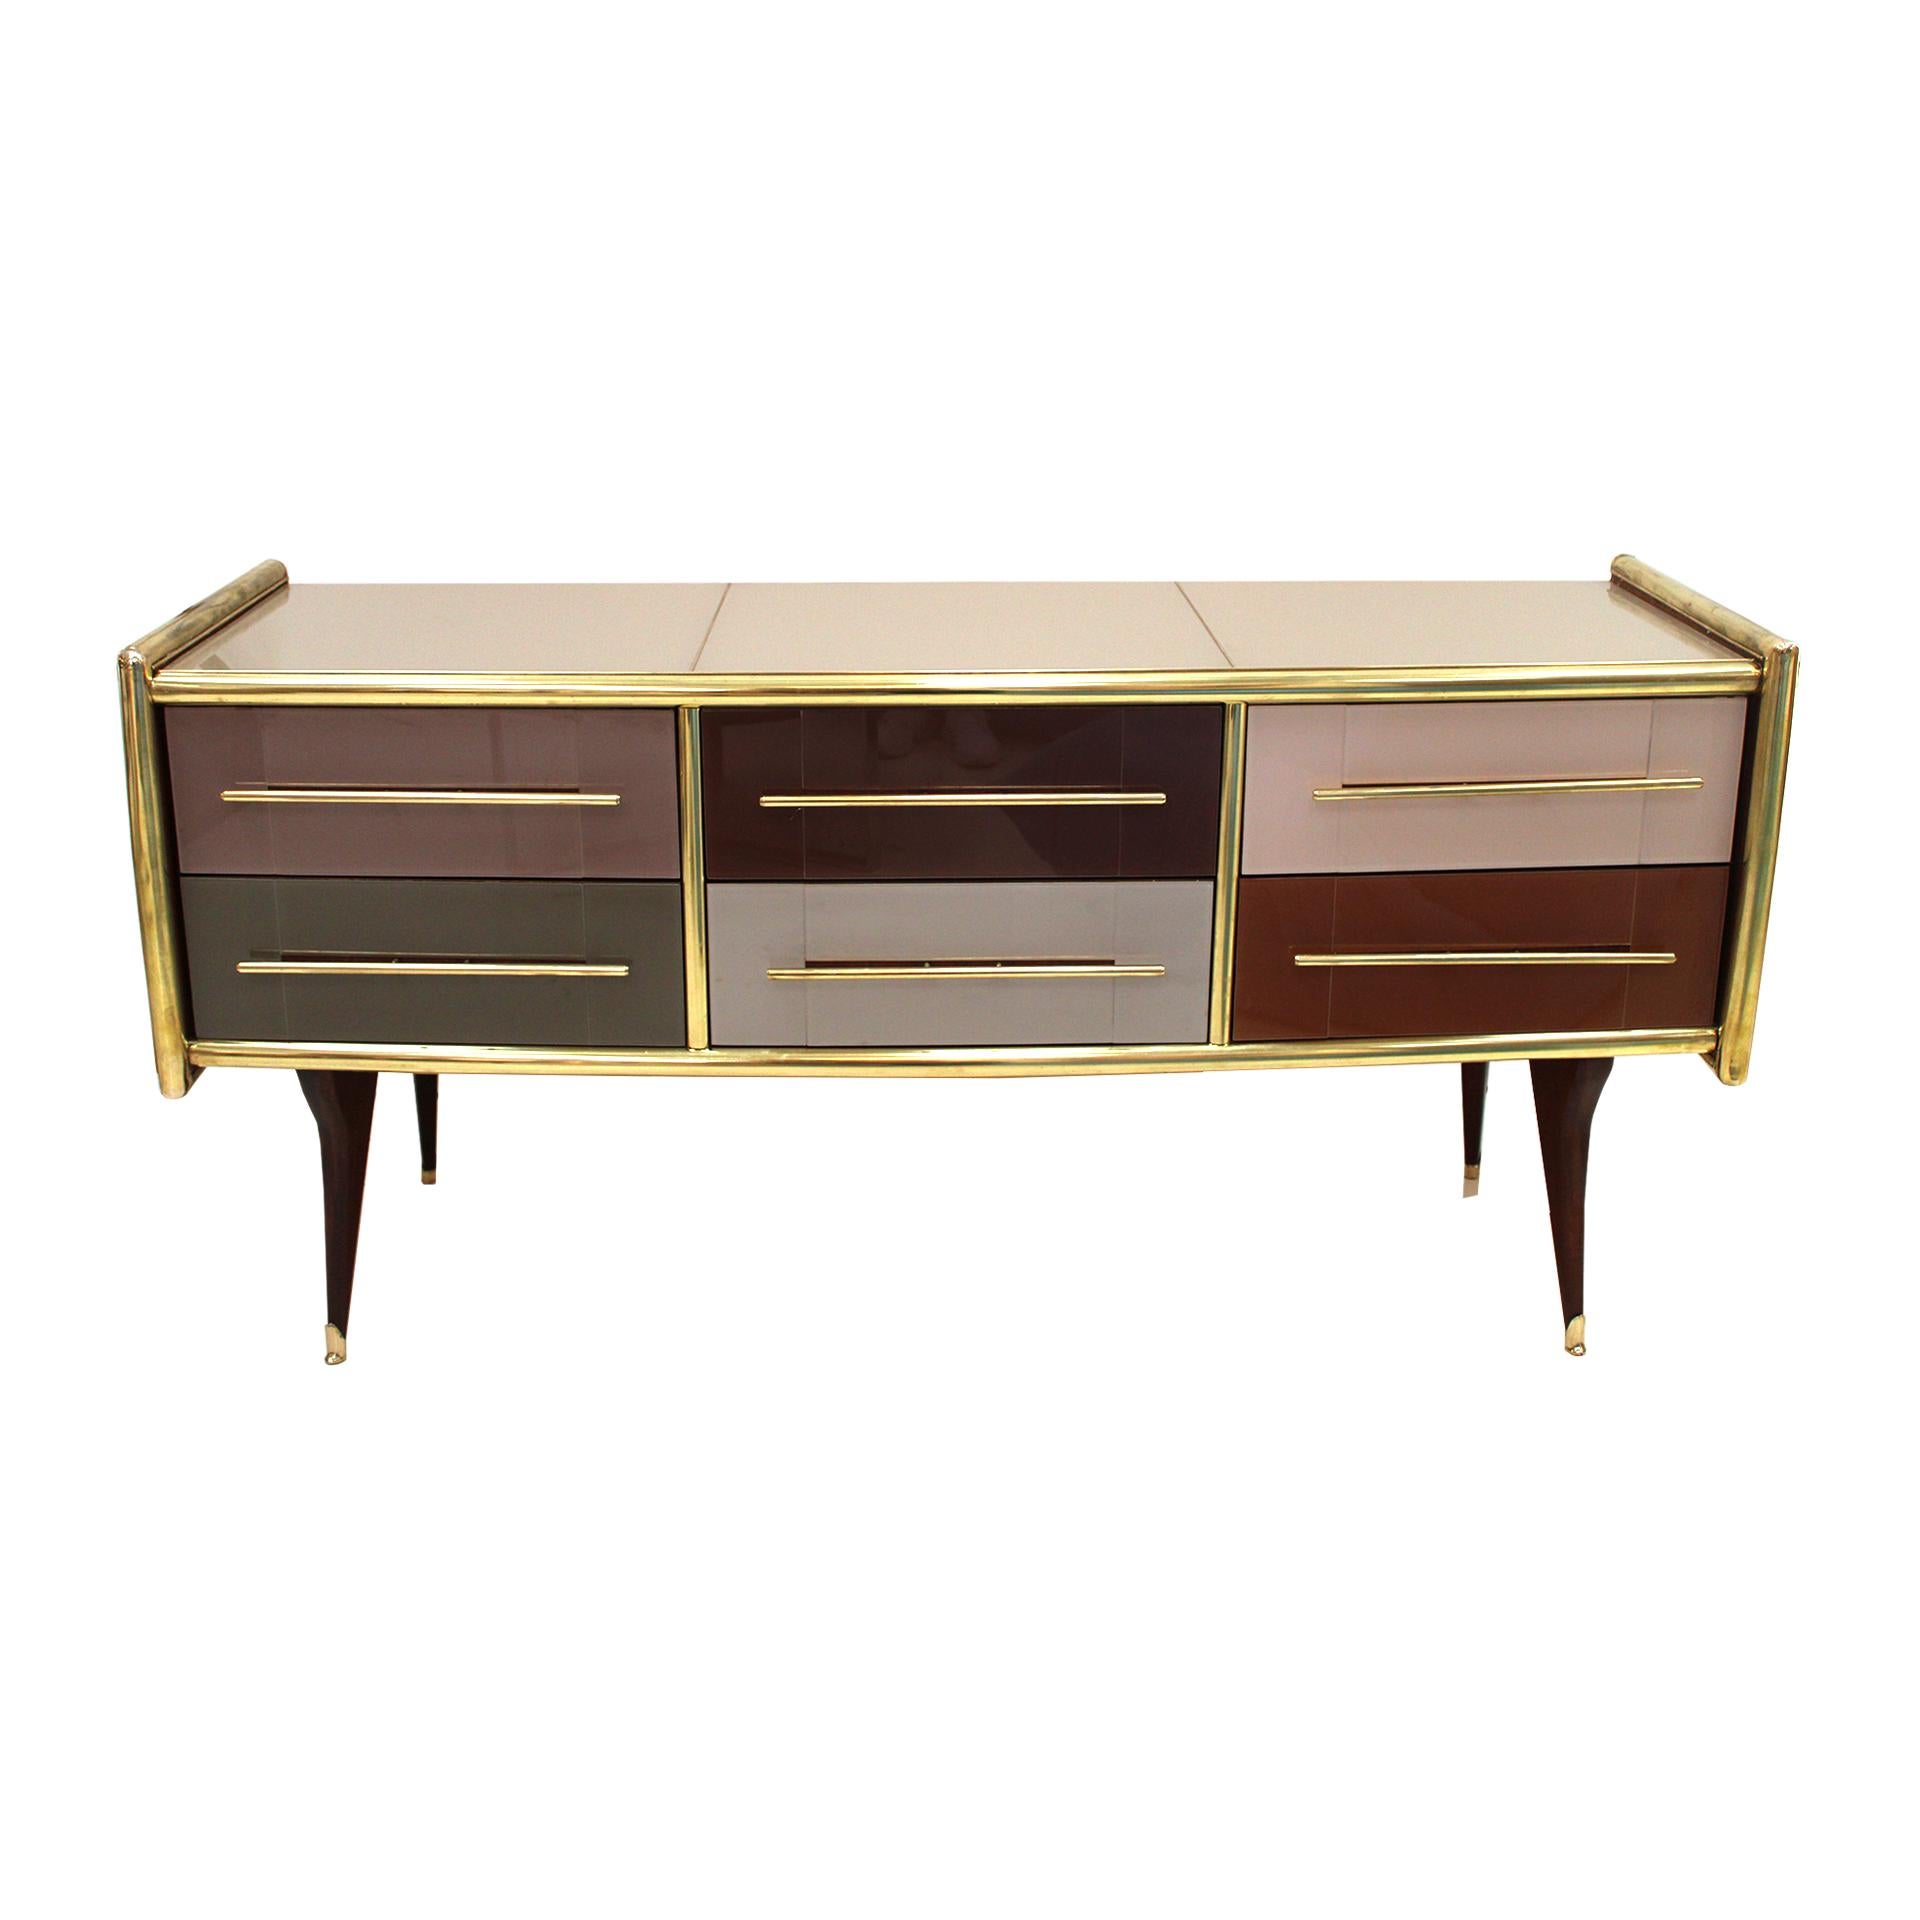 Sideborad comoposed of 6 drawers with original 1950s solid wood sturcture covered in colored glass. Handles, profiles and legs made of brass. Italy.

Our main target is customer satisfaction, so we include in the price for this item professional